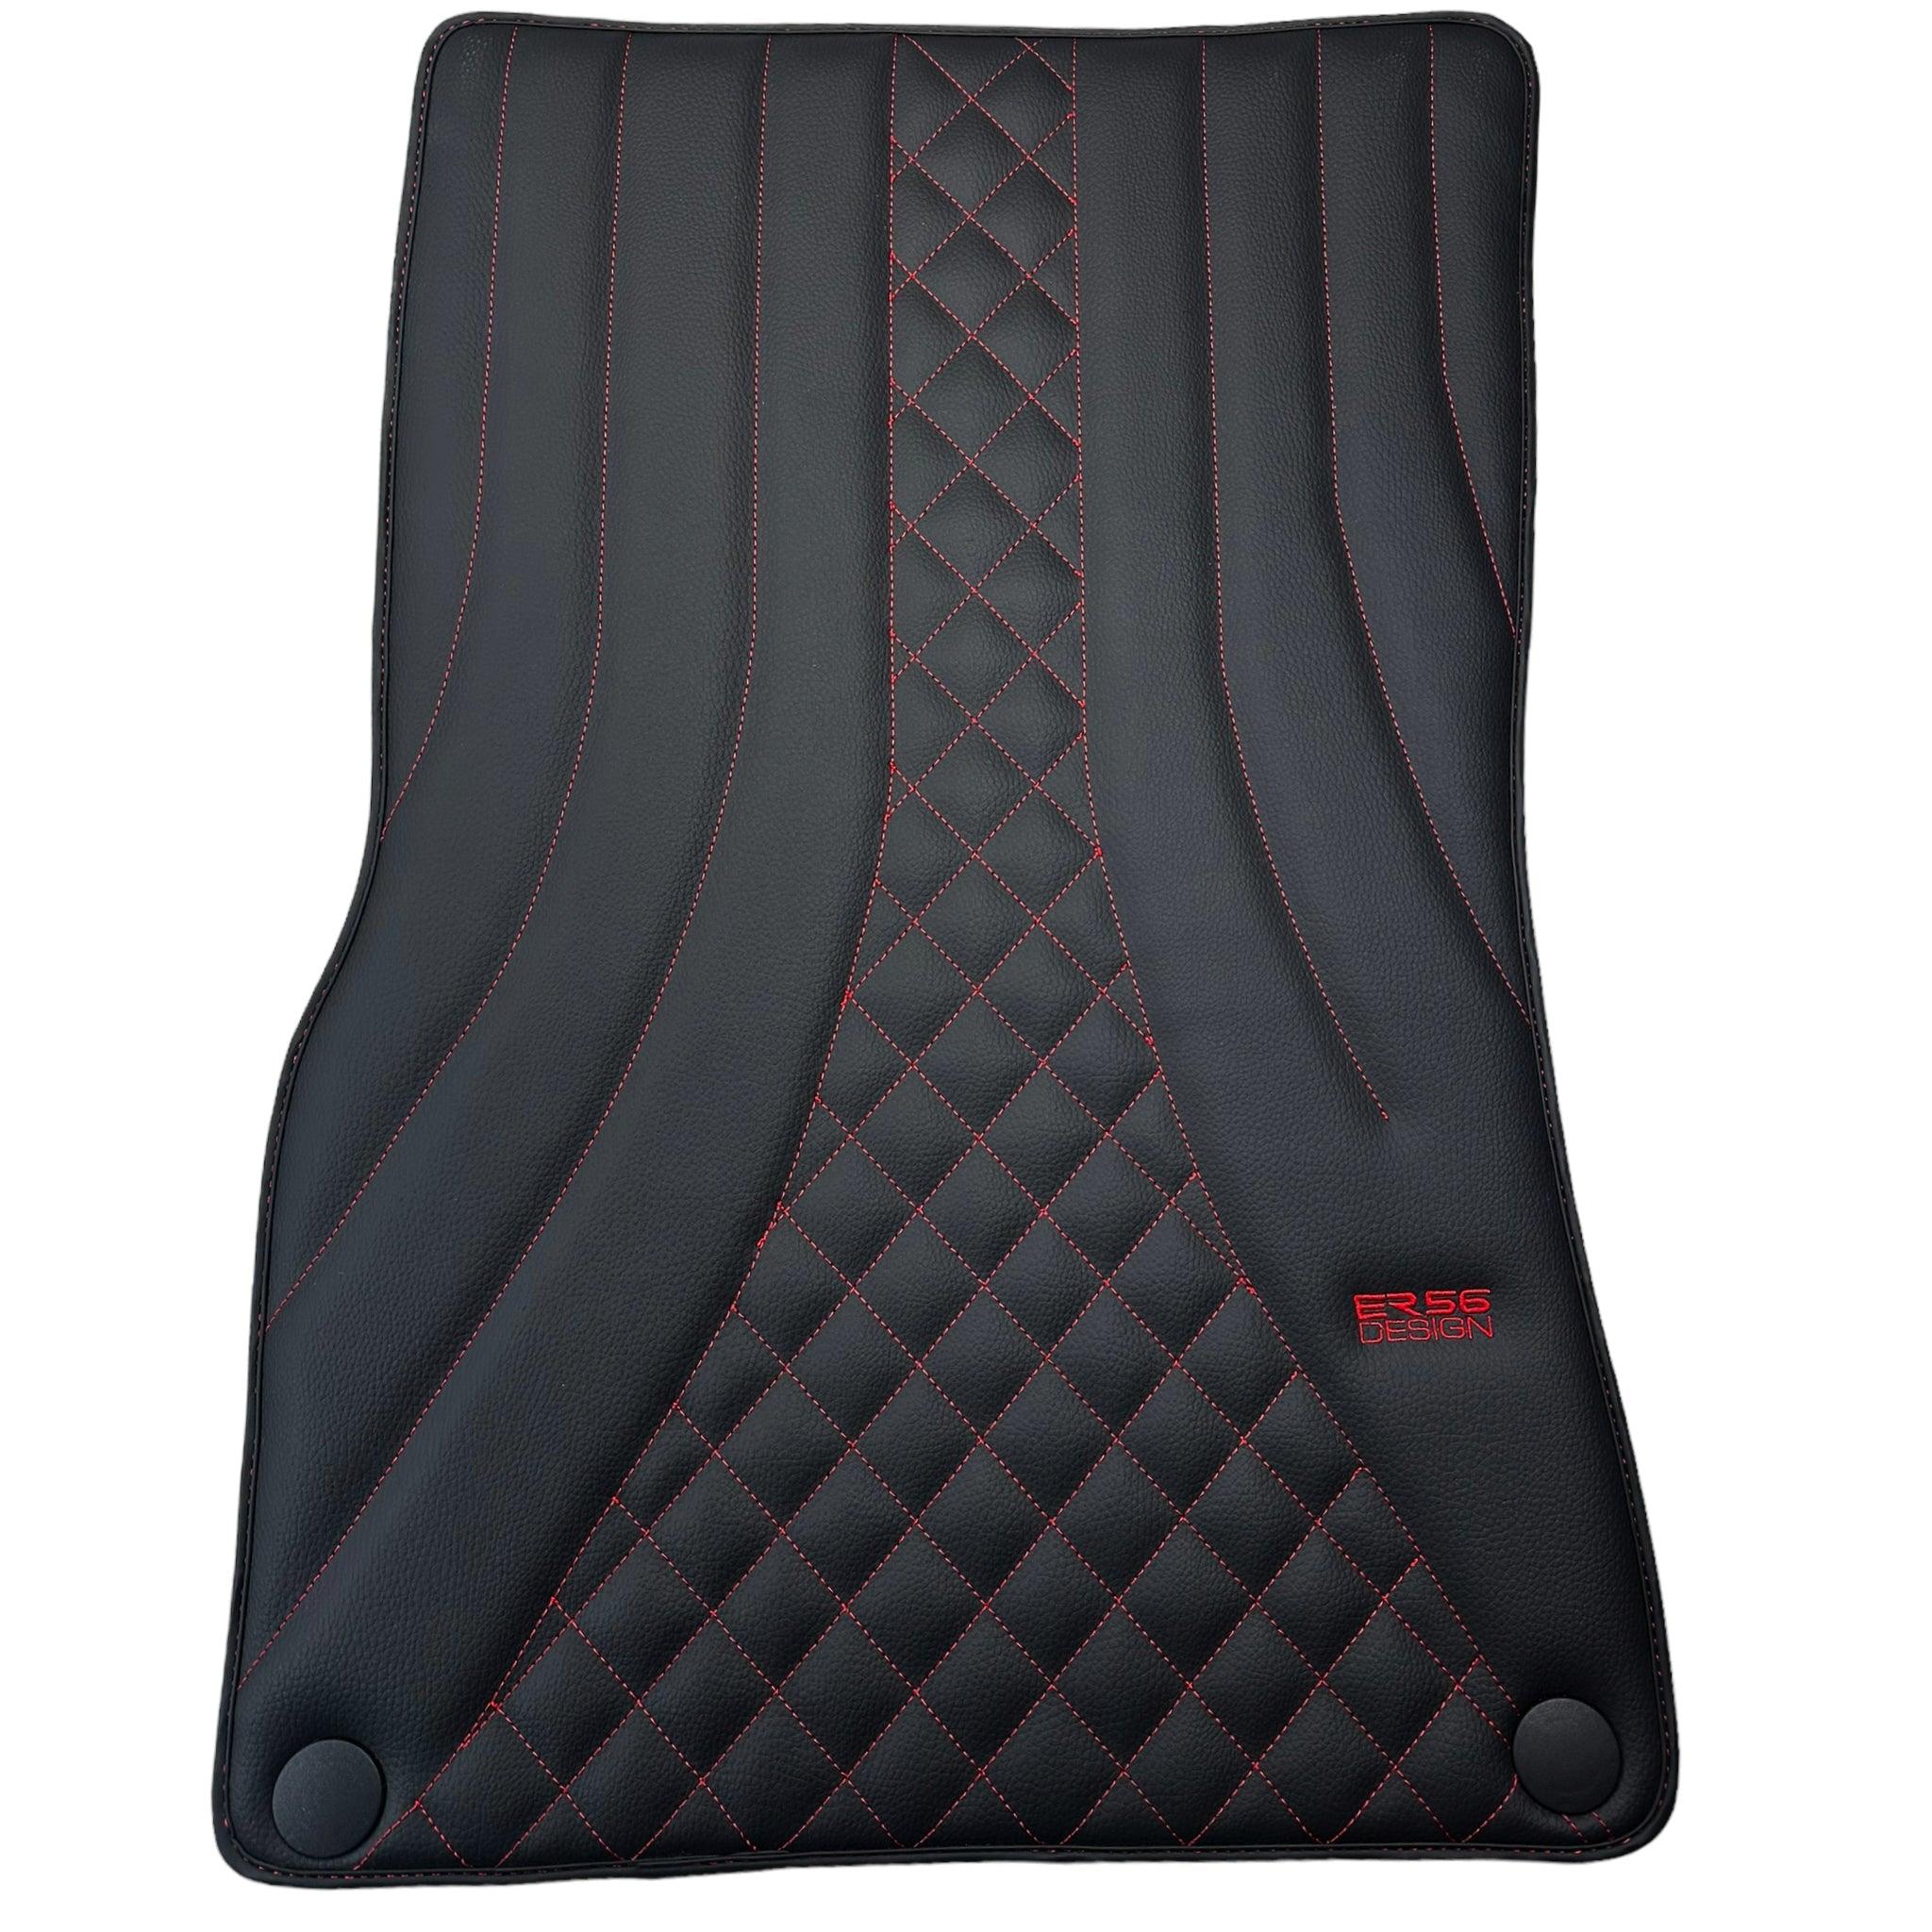 Black Leather Floor Mats For Mercedes Benz S-Class W140 (1991-1998)